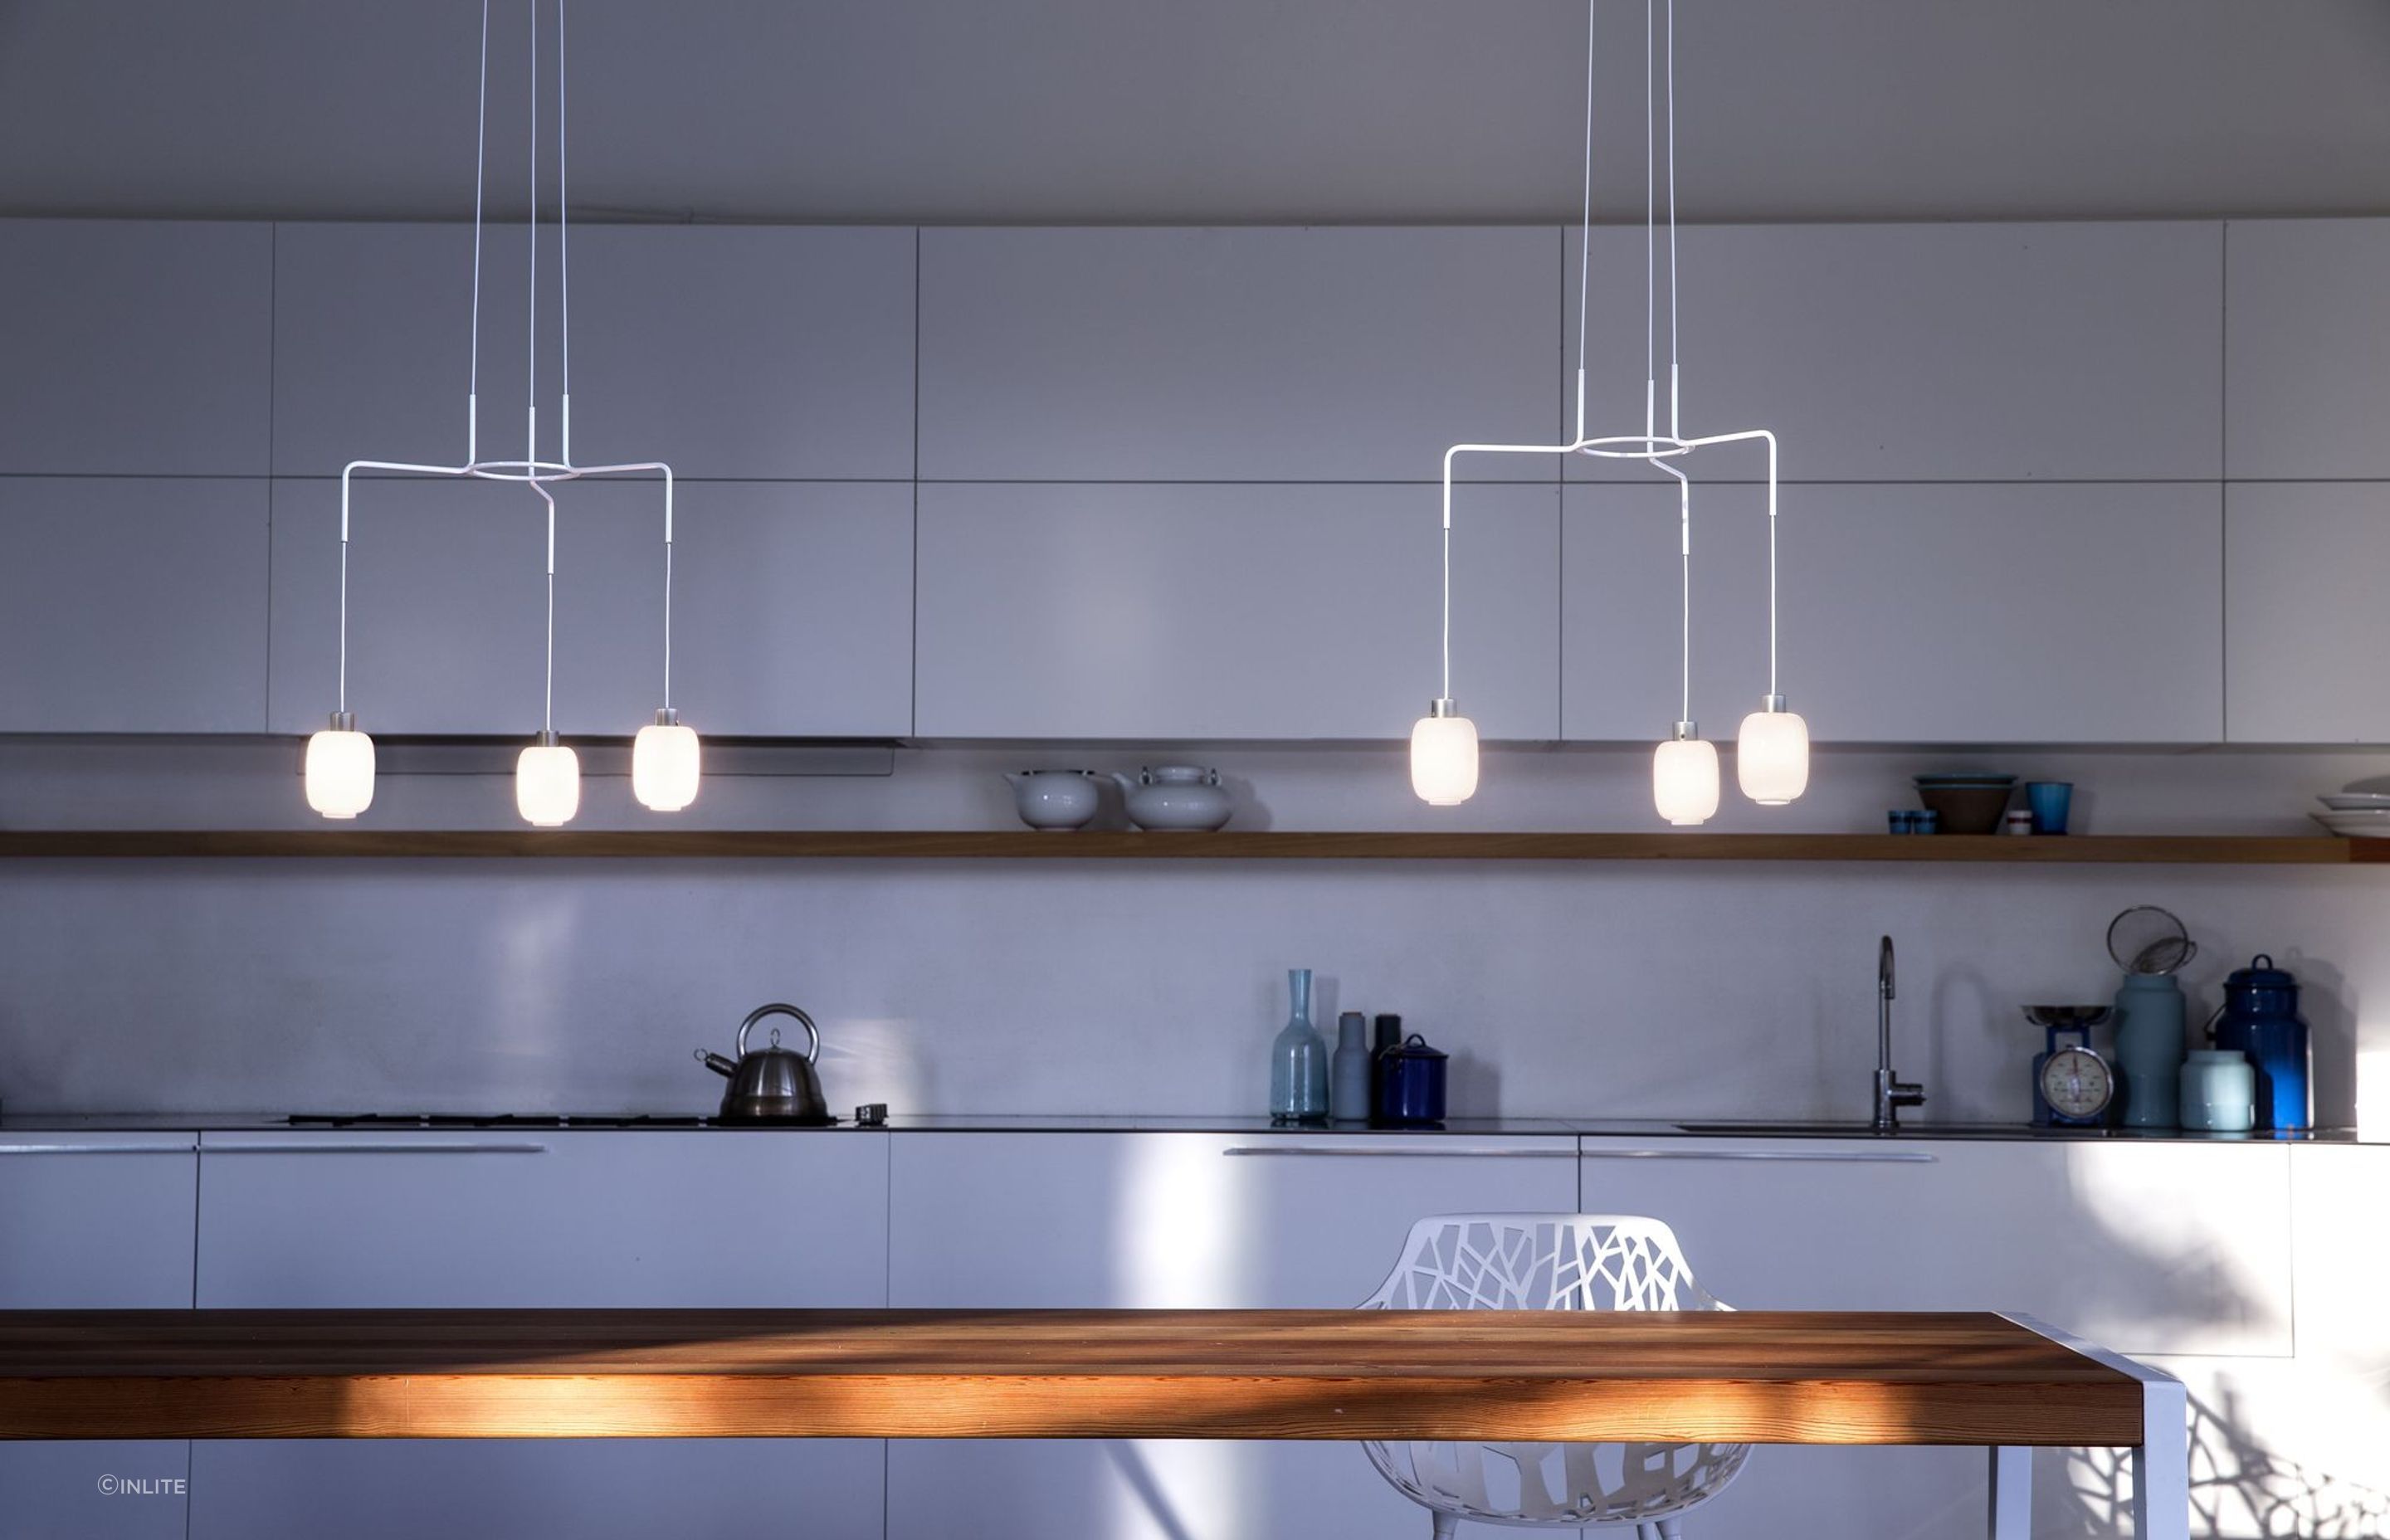 Ensuring your feature lights complement your space is vital, wonderfully done here with the Chan Pendant Light by Prandina.